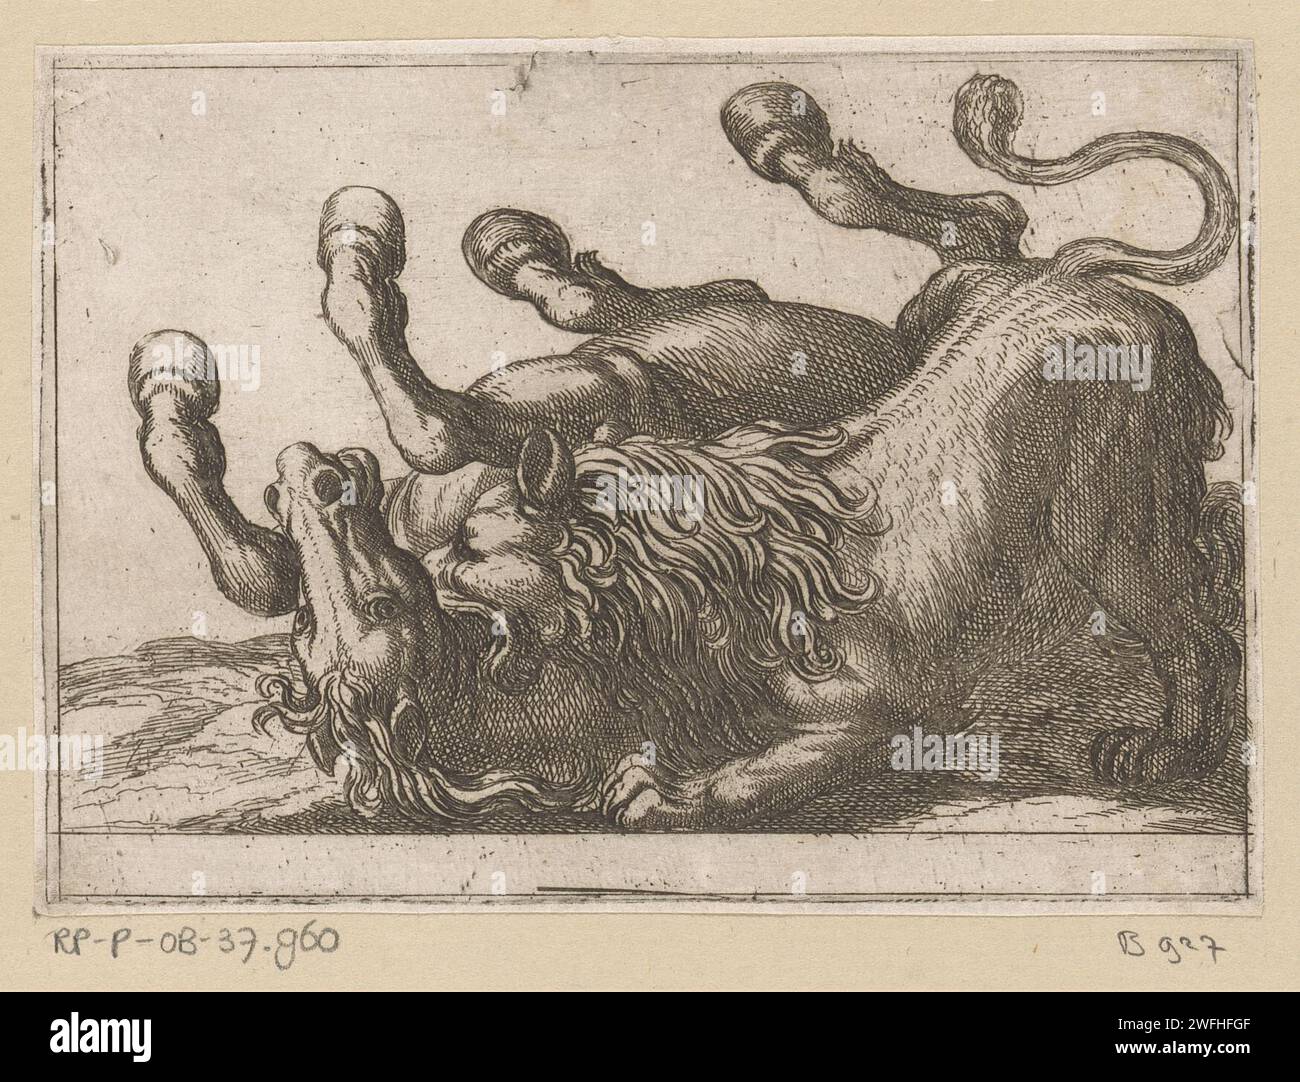 A lion biting the neck of a horse, Antonio Tempesta, 1600 print  print maker: Italypublisher: RomeVaticaanstadItaly paper etching fighting. horse. beasts of prey, predatory animals: lion Stock Photo